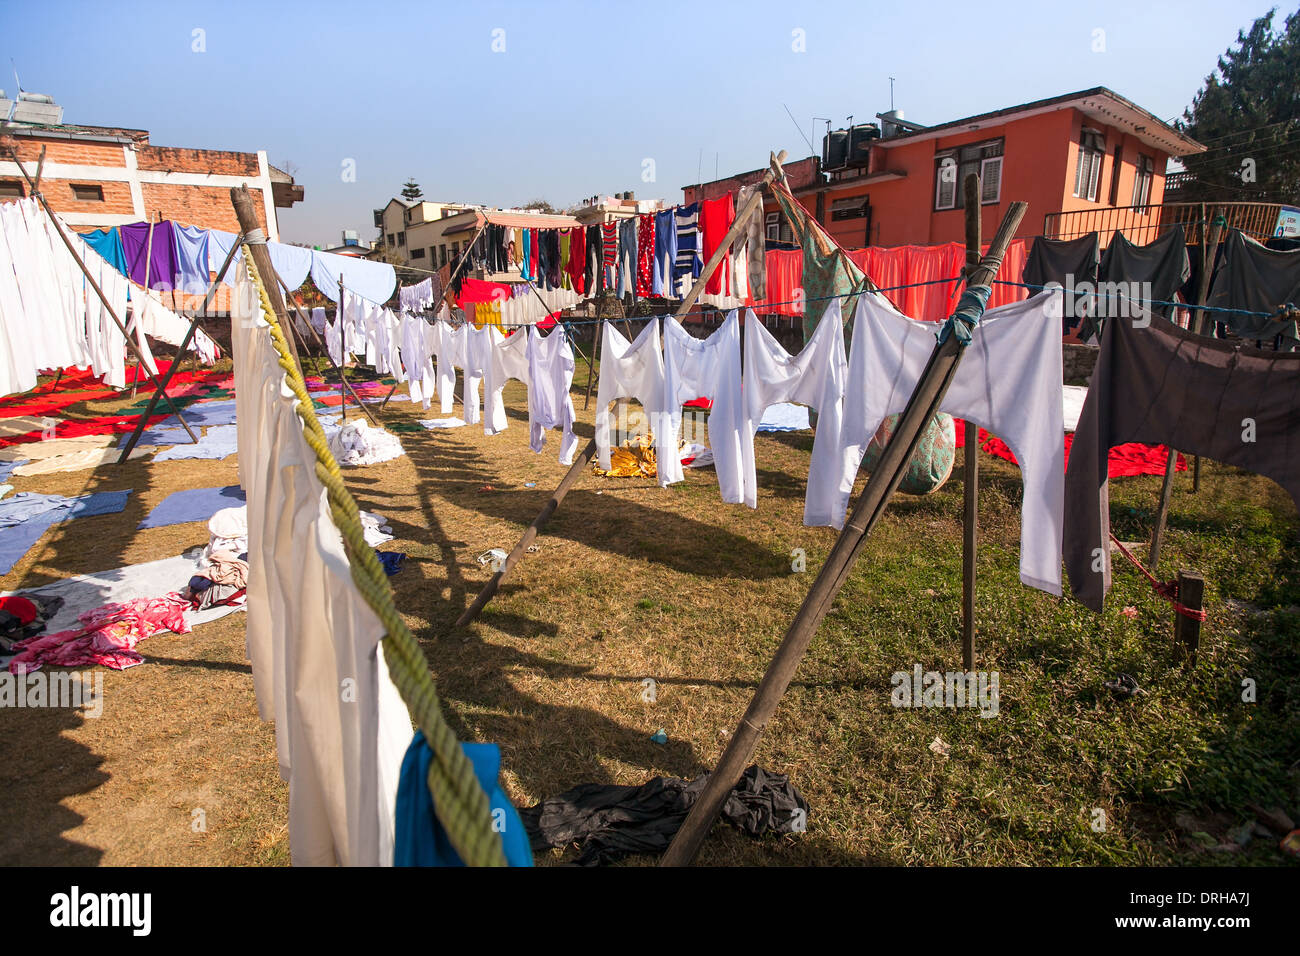 Laundry hanging in the open to dry in Kathmandu Stock Photo